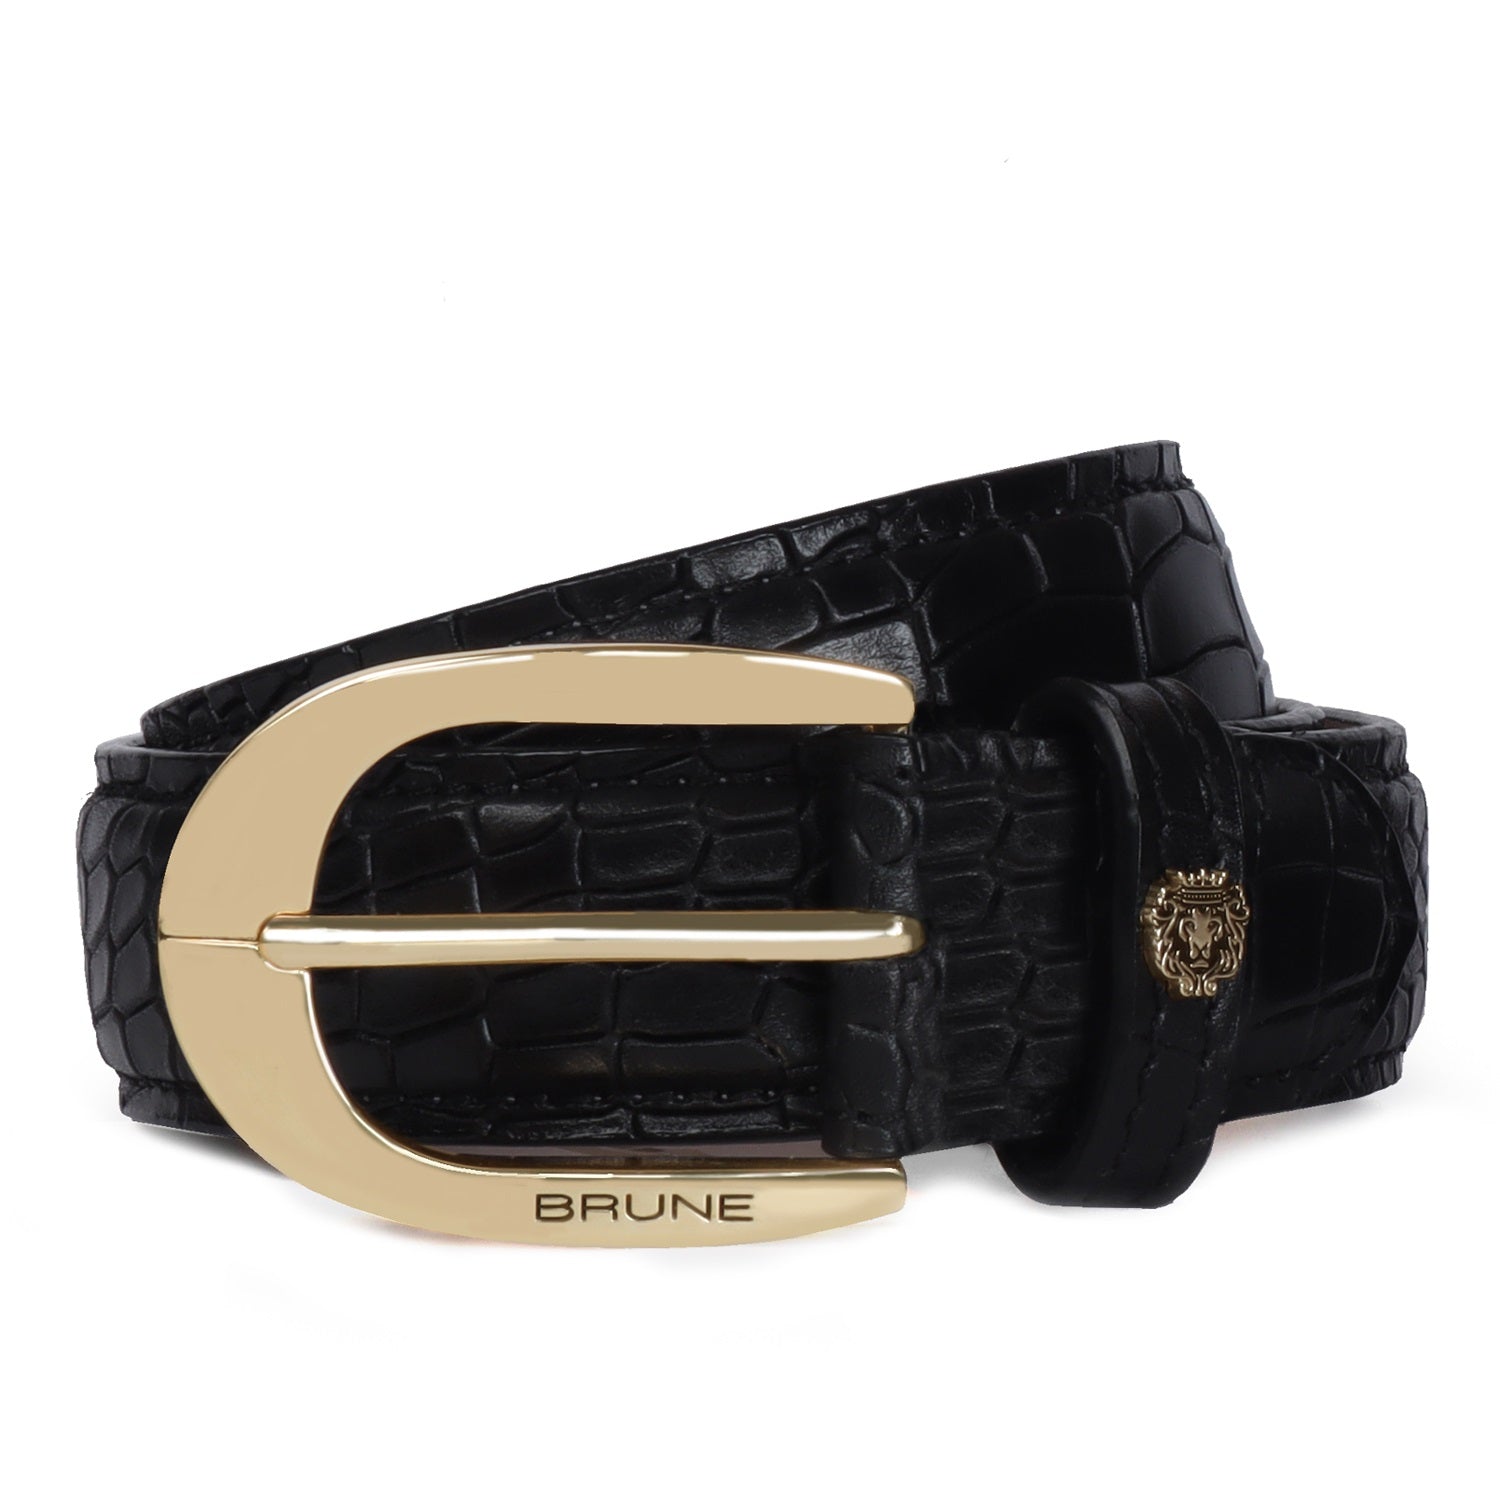 New Oval Shape Buckle Belt in Black Croco textured Leather(Designed For T-20 World Cup 2023 Team india) By Brune & Bareskin